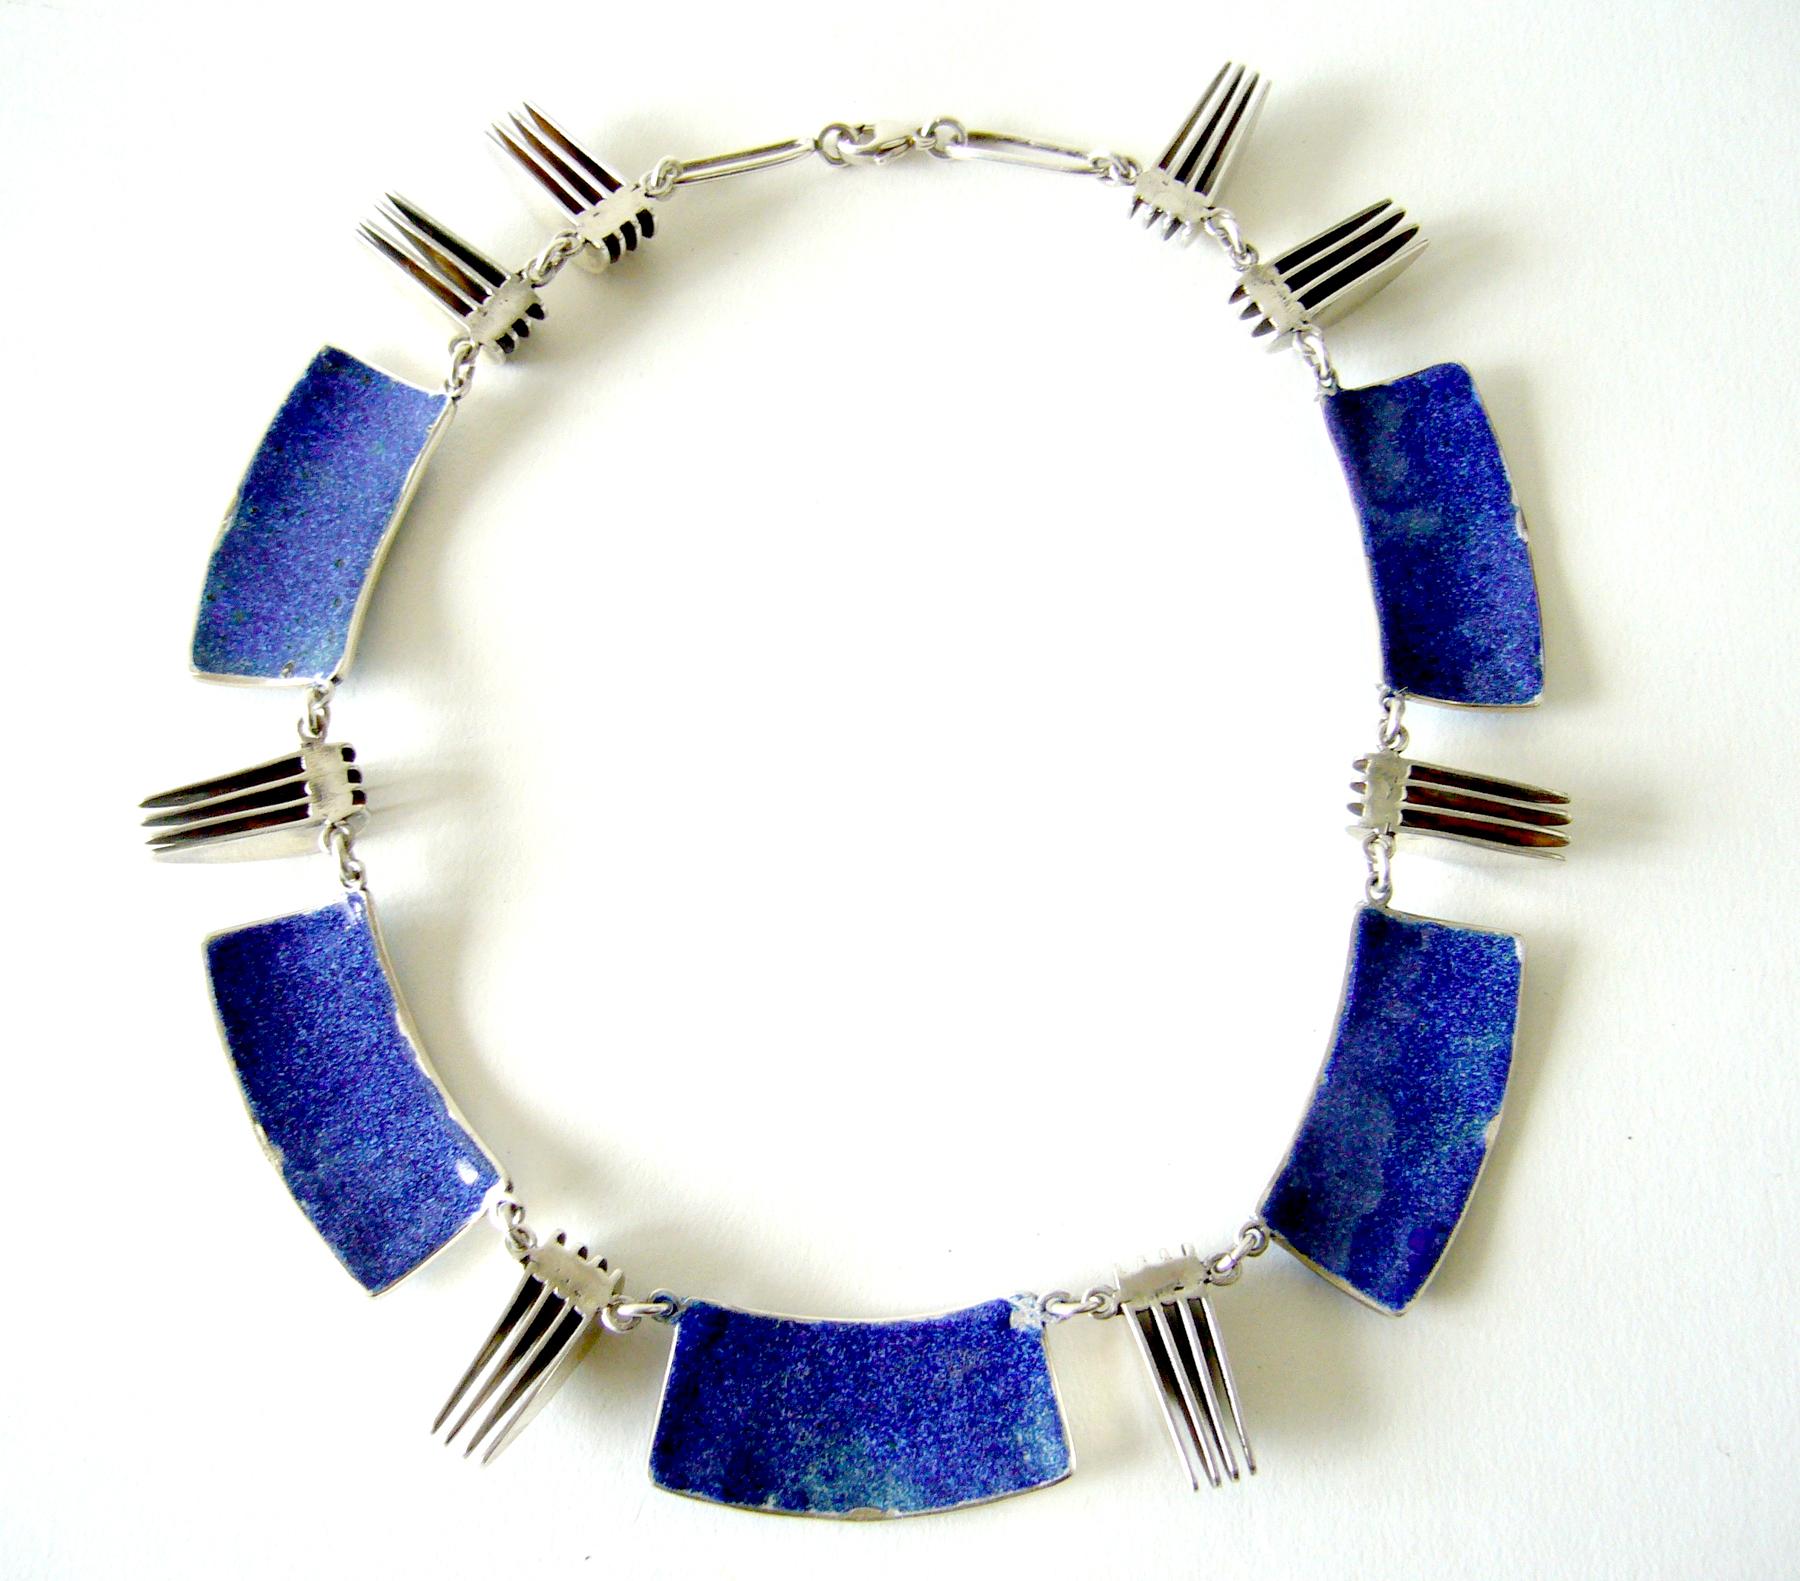 Enamel over sterling linked plaque necklace with eight sterling silver Moderne style elements separating the enamel plaques.  Rare and one of a kind, created by Mary Schimpff of New Smyrna Beach, Florida.  Necklace is made of the utmost quality and